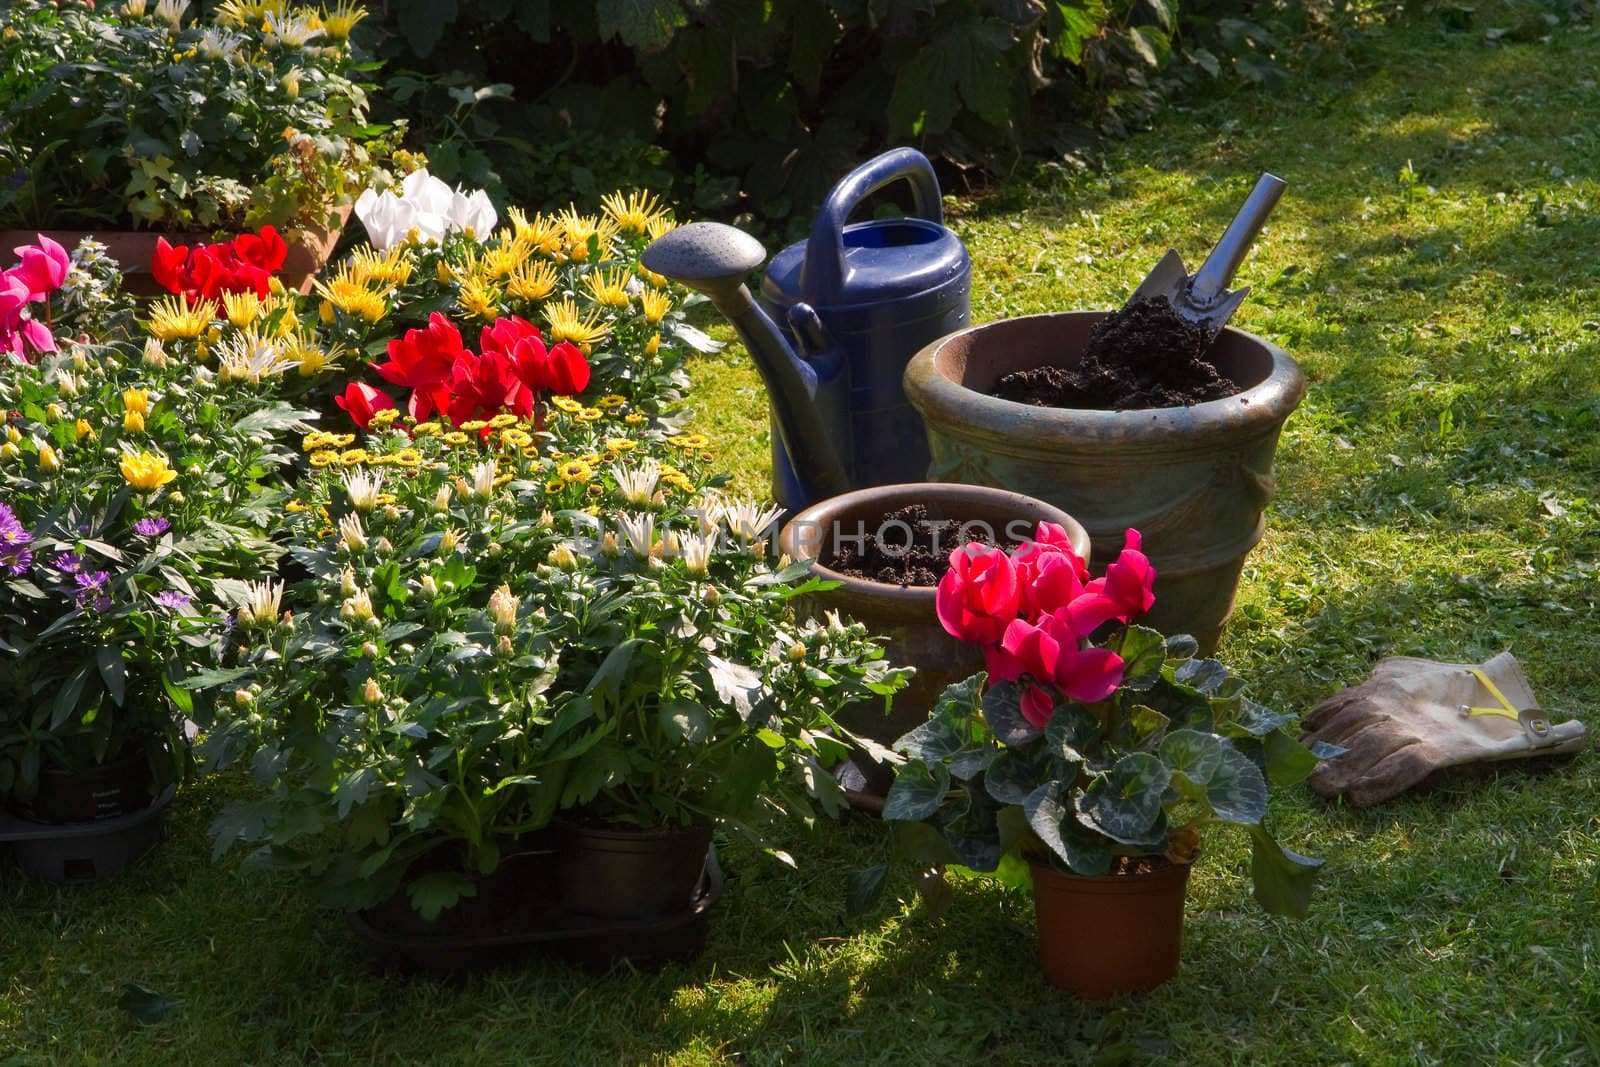 Garden with autumn flowers in September - Planting new plants in flowerpots and -boxes